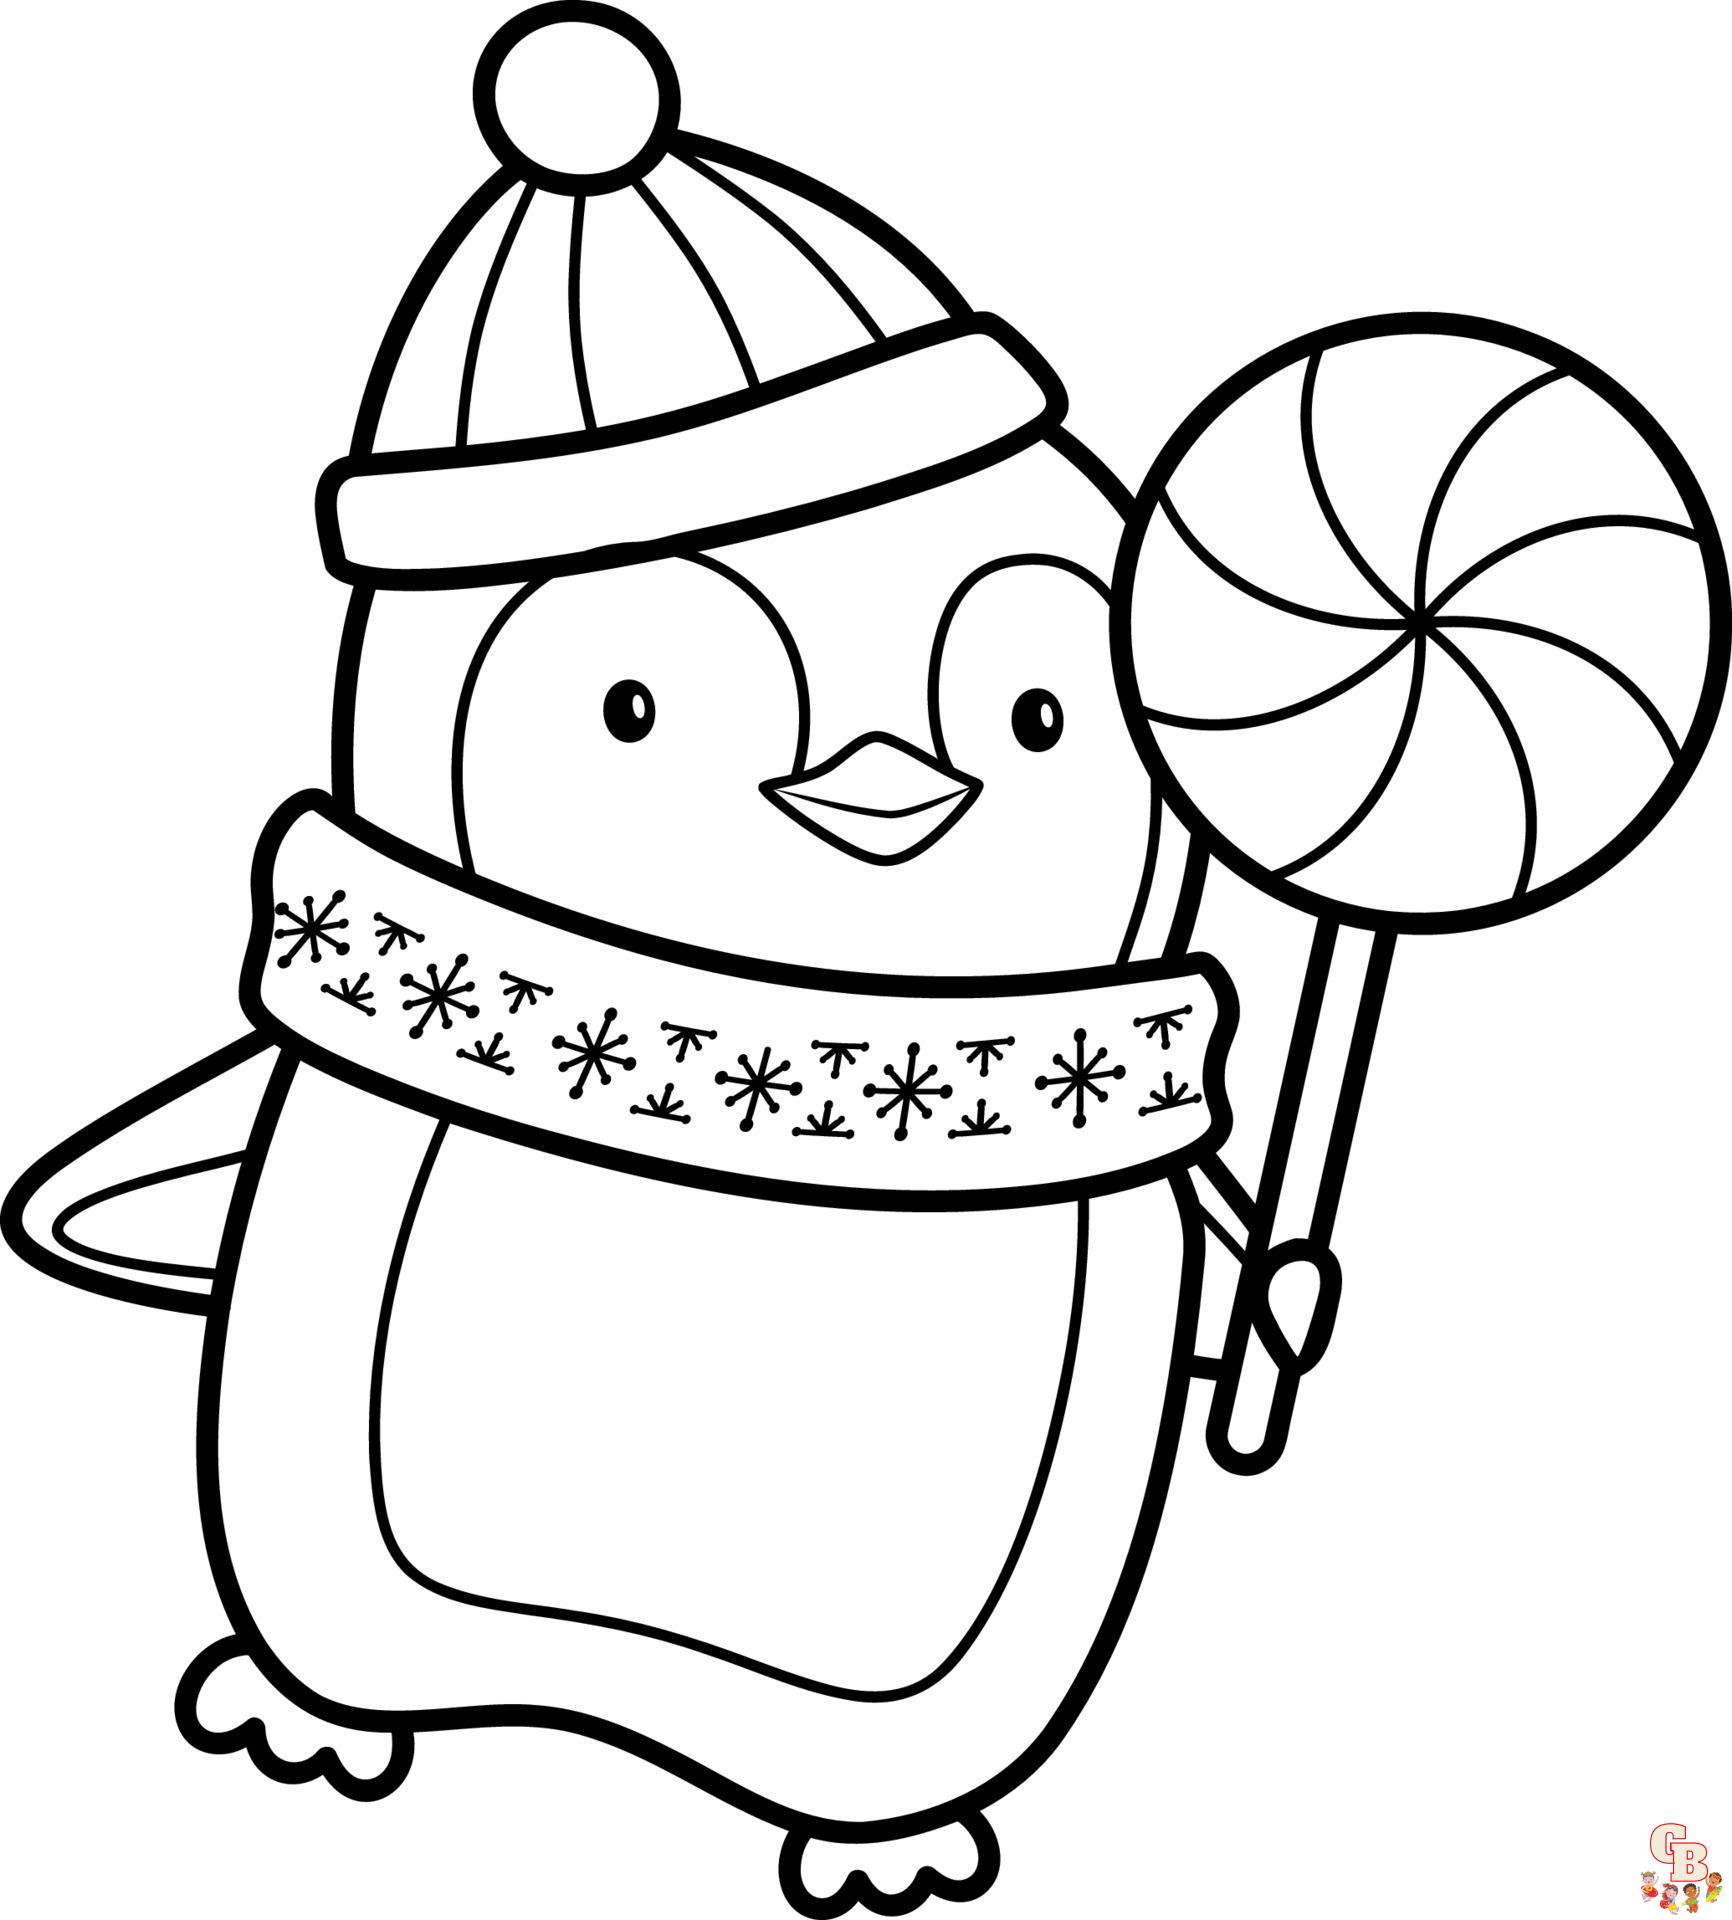 Easy Christmas coloring pages 4